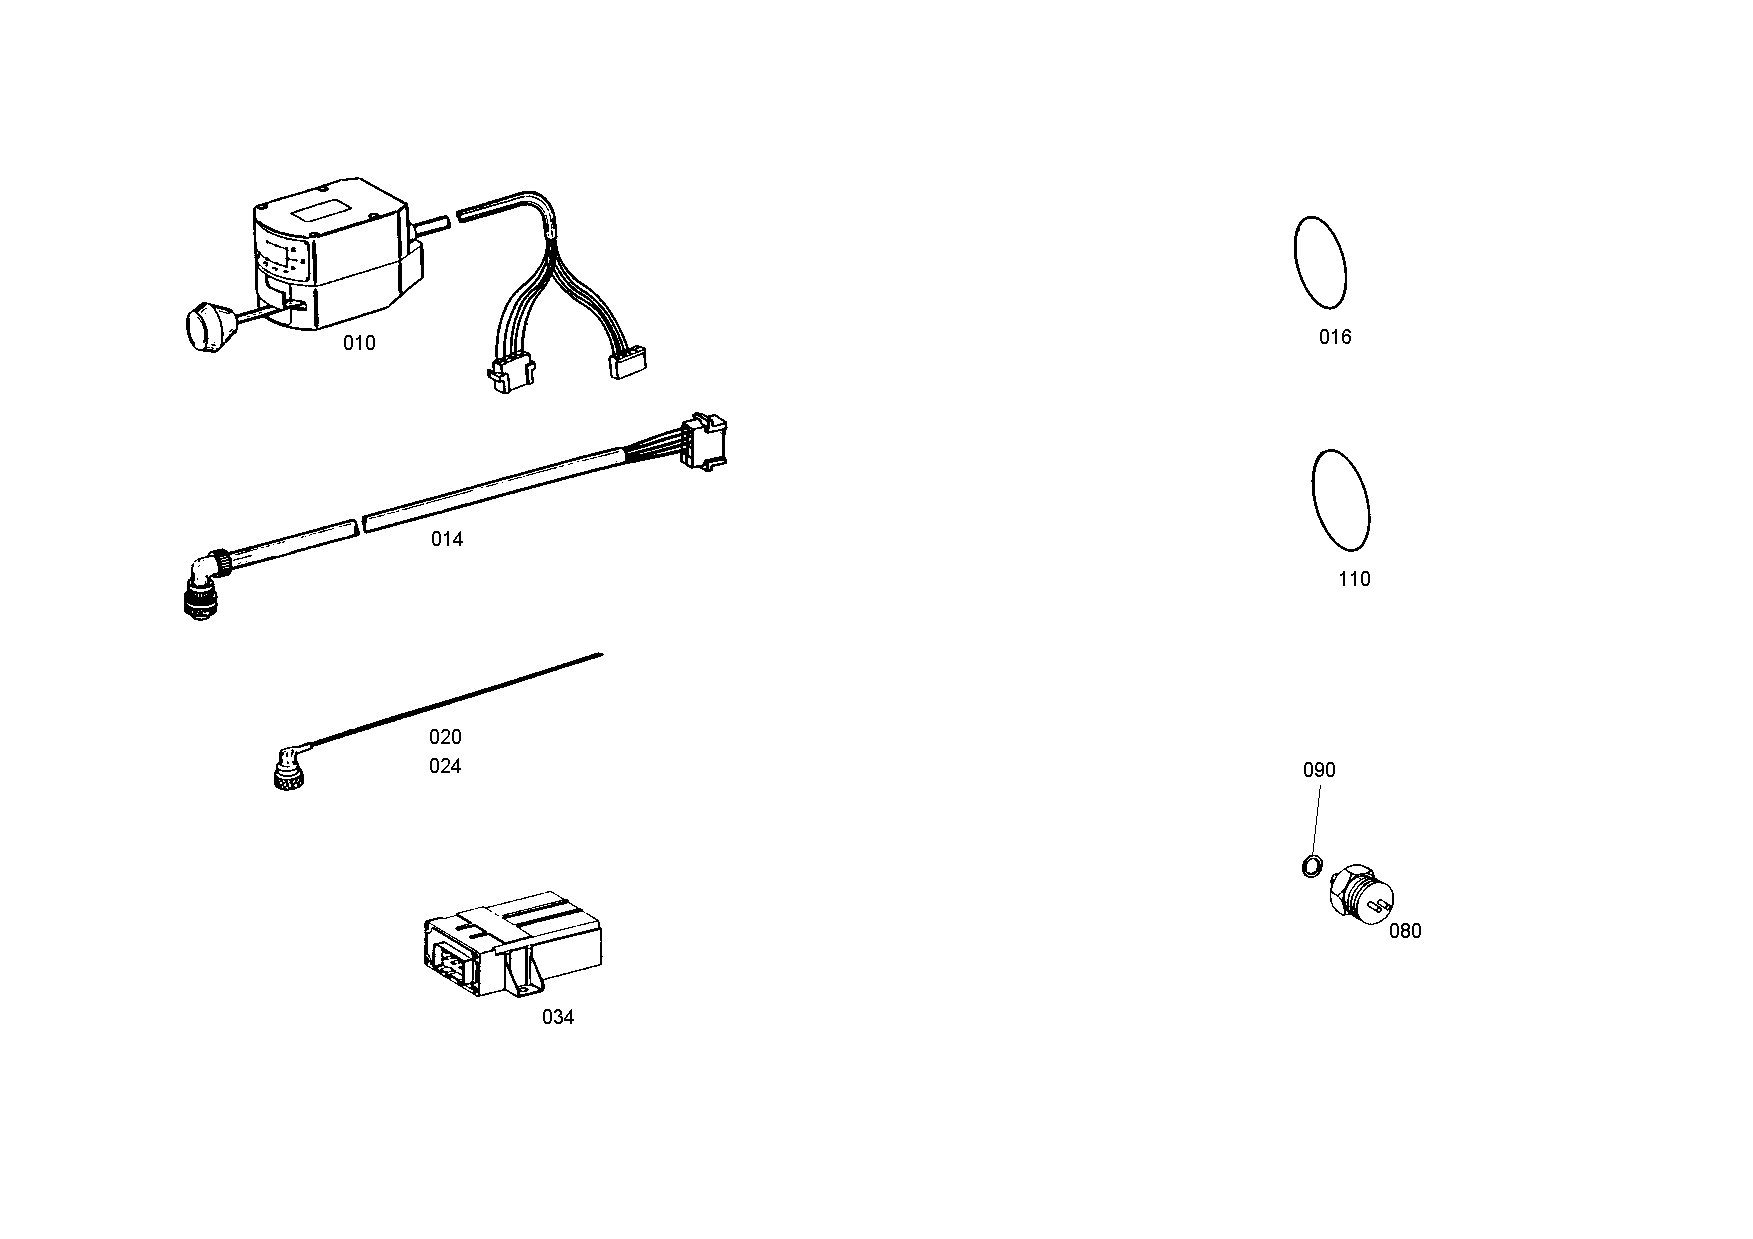 drawing for E. N. M. T. P. / CPG 599231480 - FS SG 6 S (figure 1)